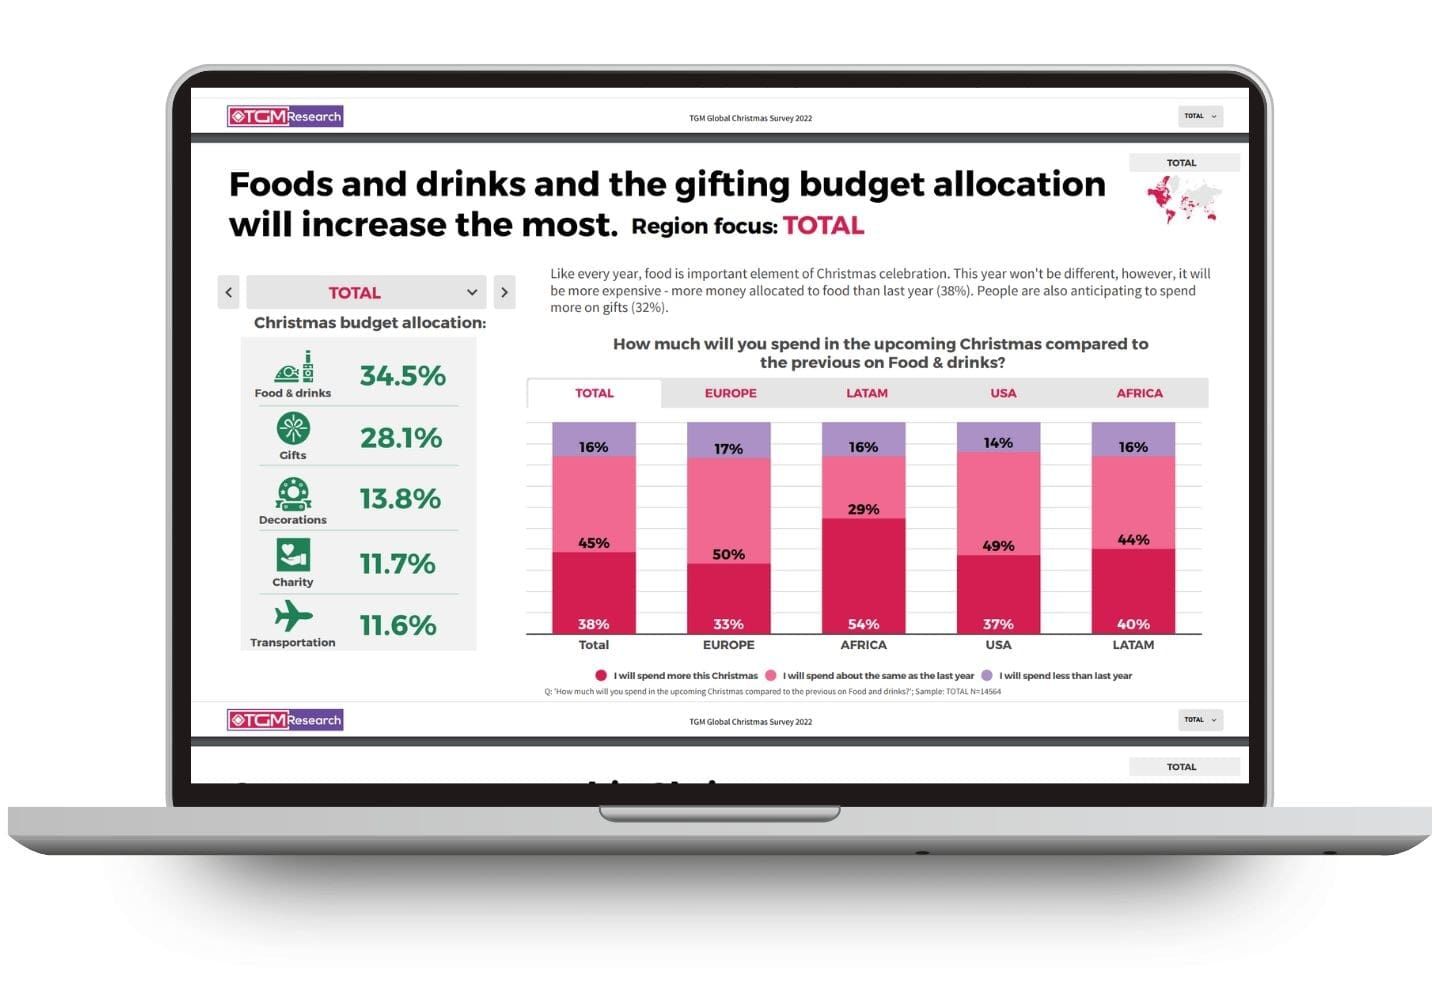 Foods and drinks and the gifting budget allocation will increase the most